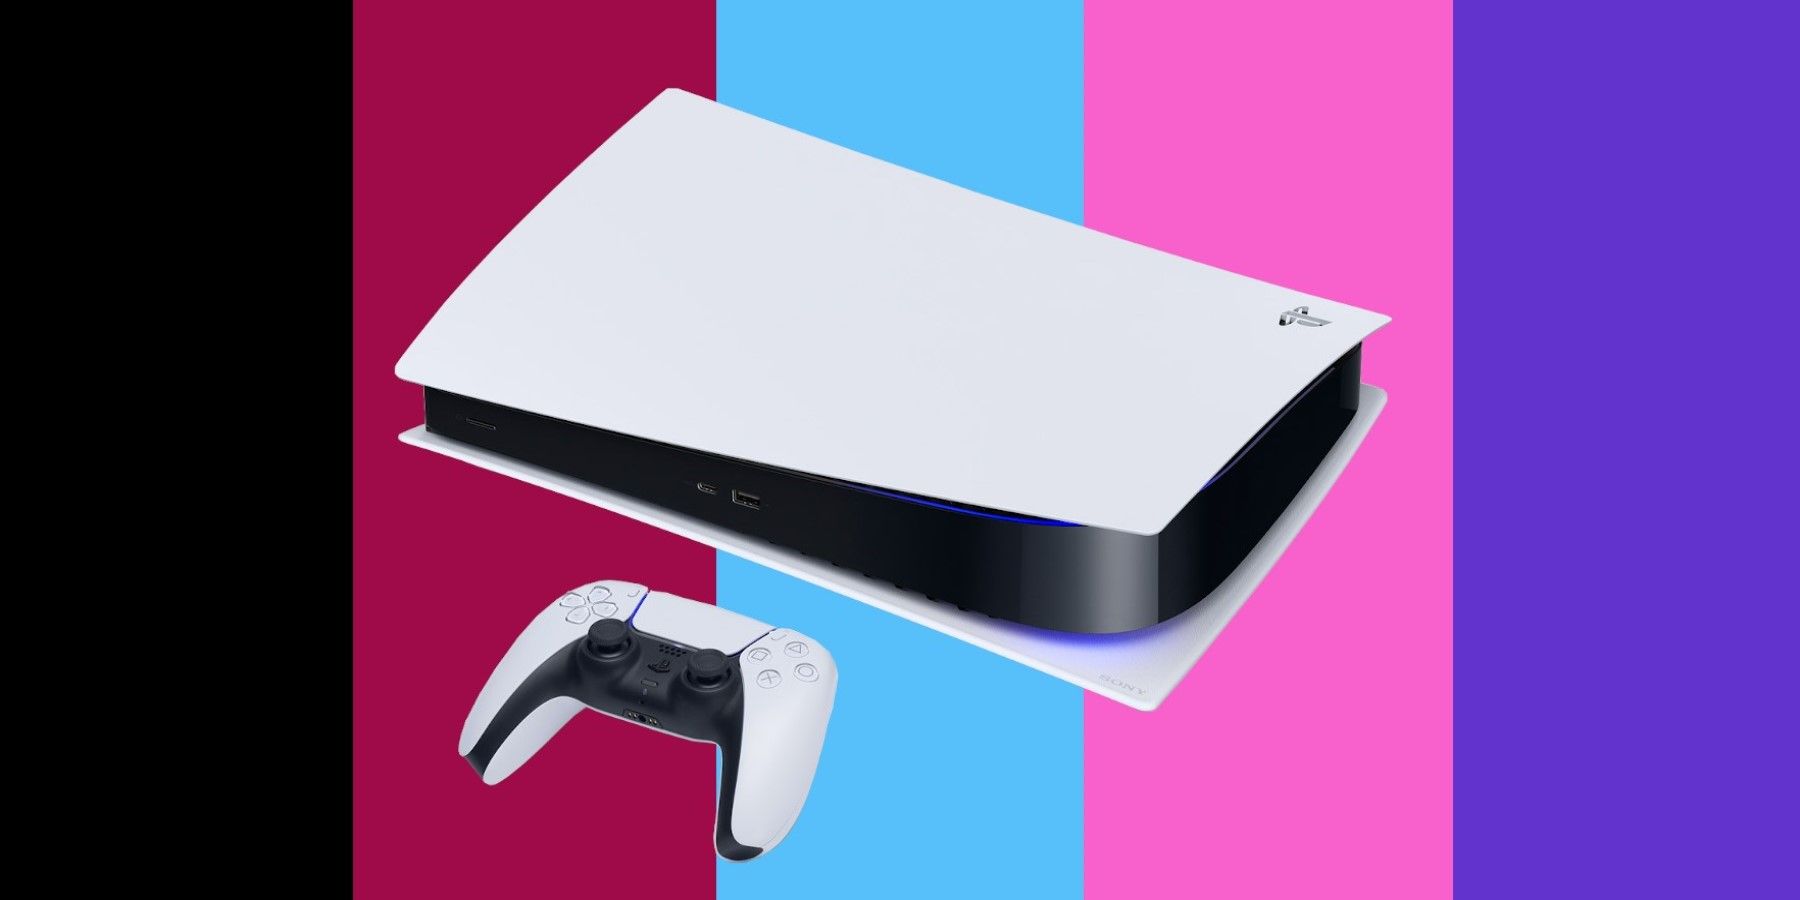 Sony's new PS5 faceplates come in black and colorful options - The